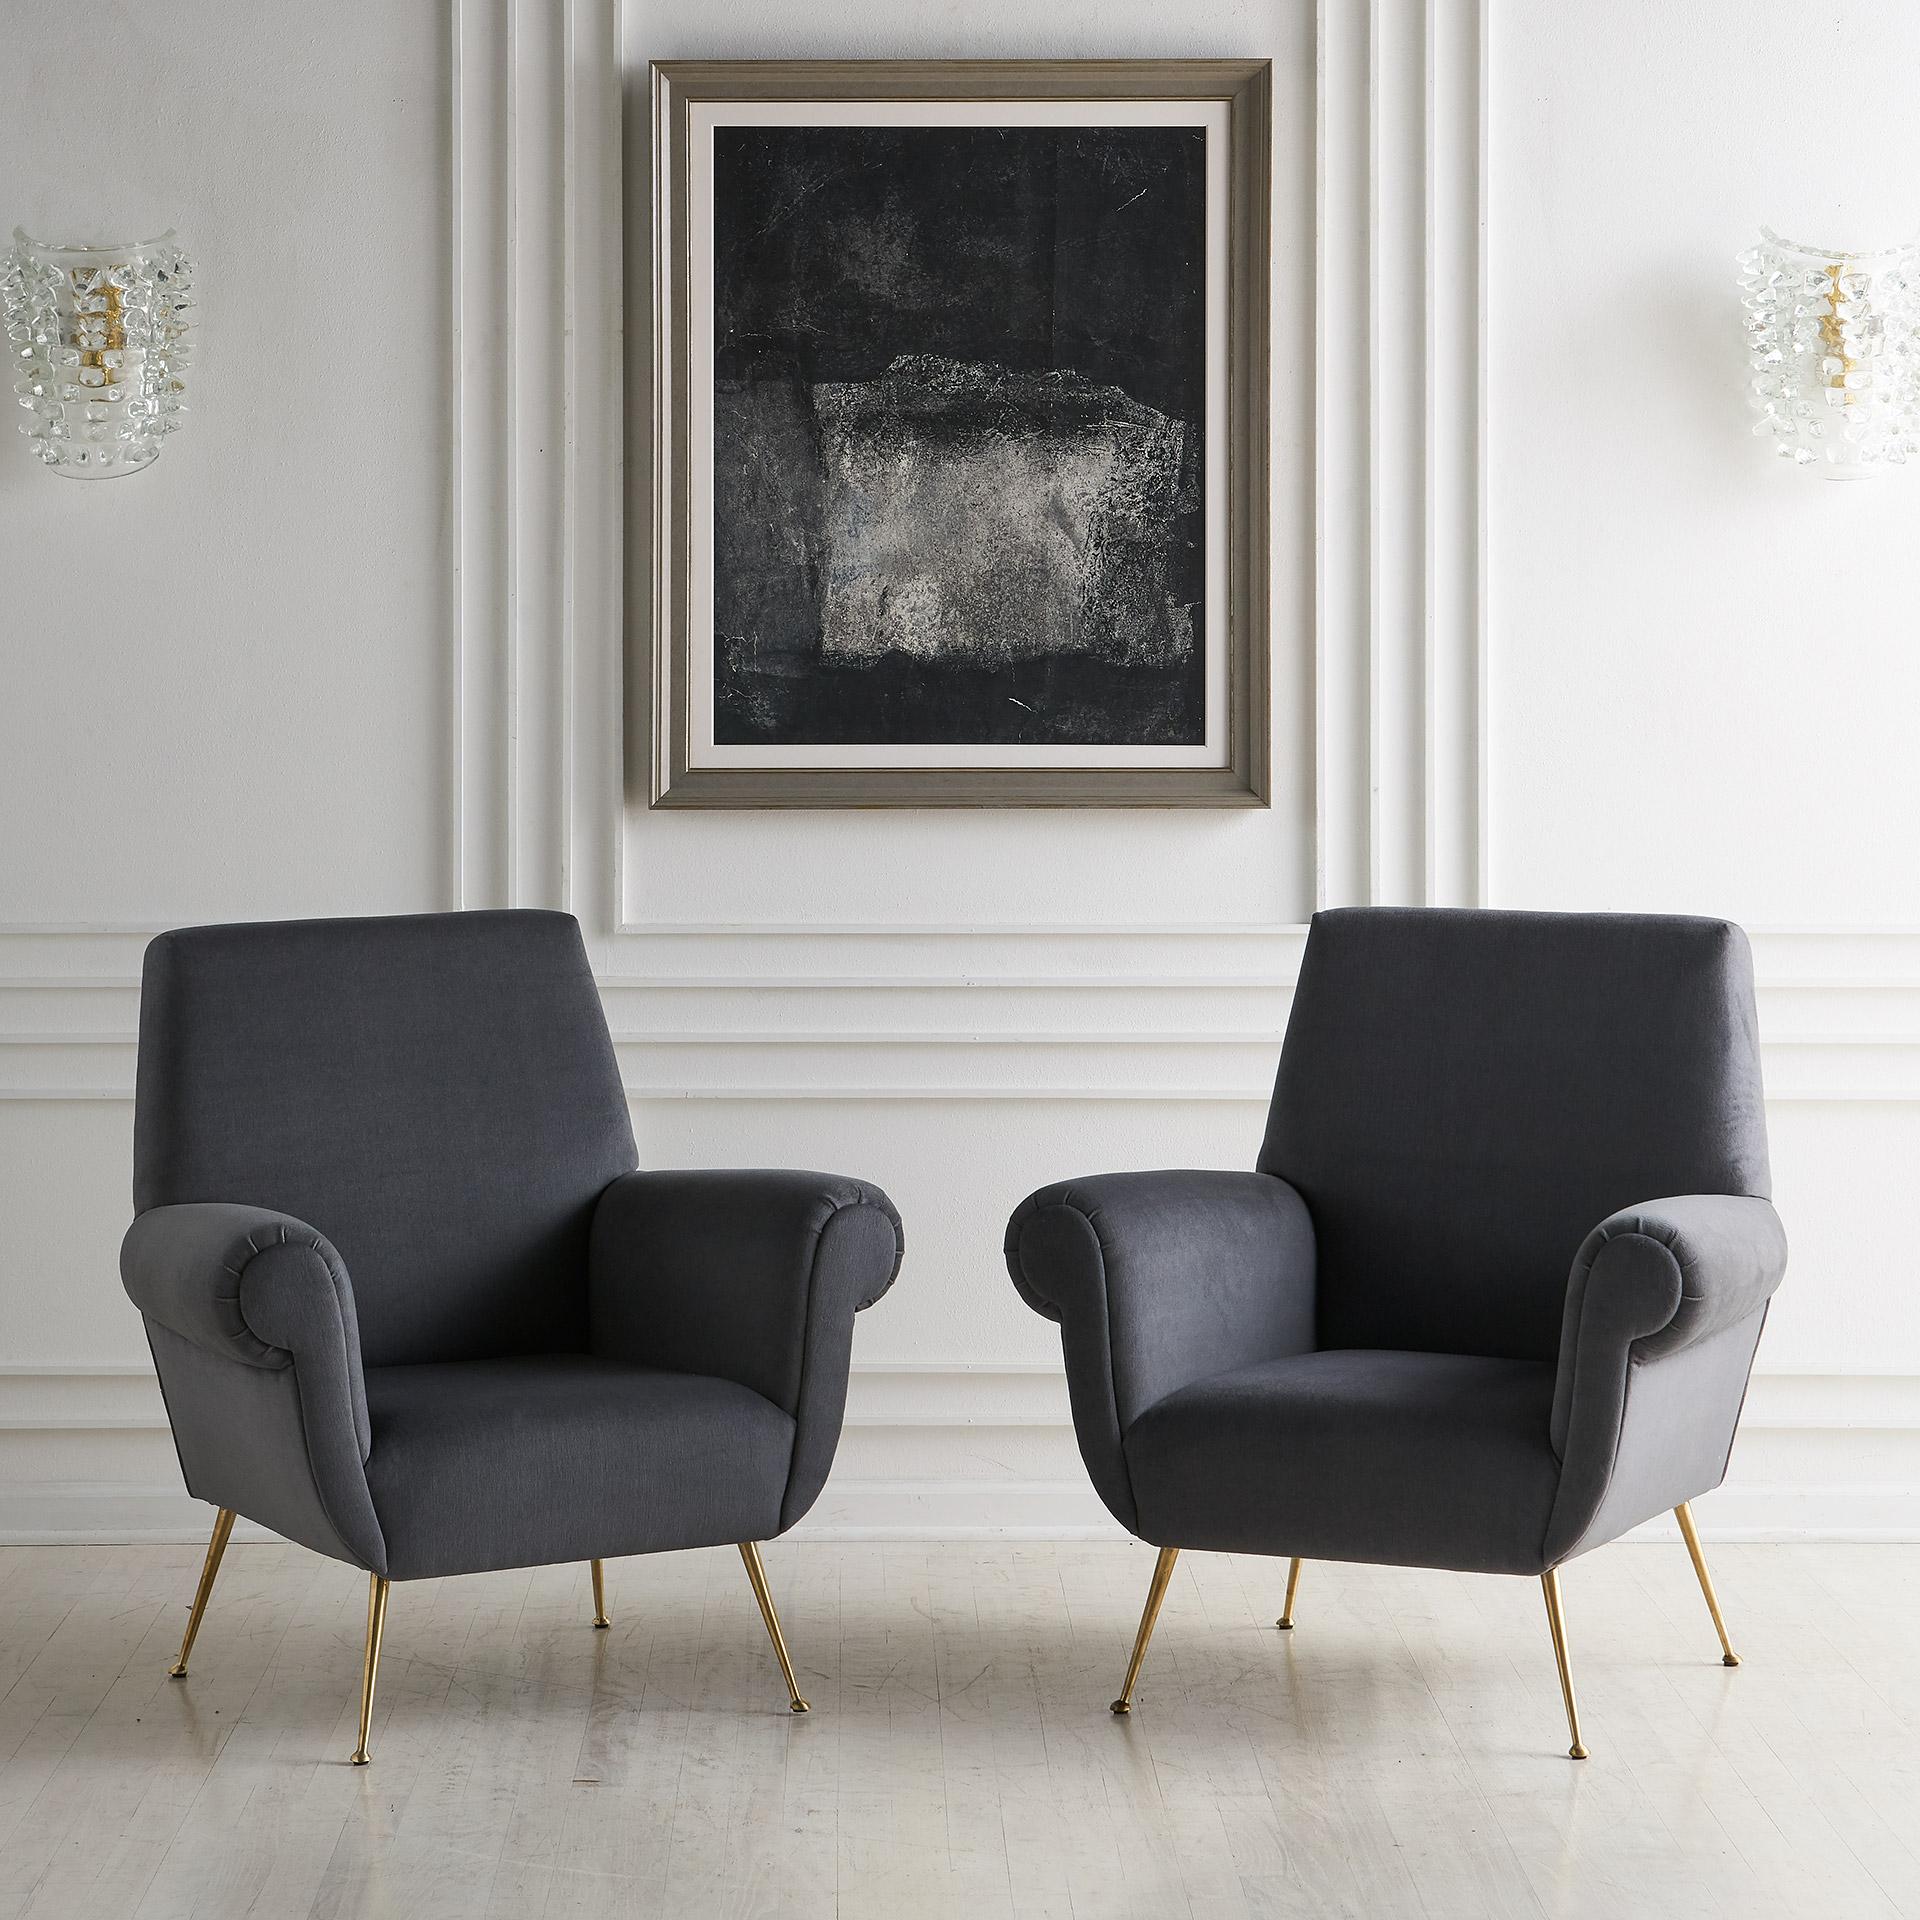 A pair of comfortable and luxurious Italian lounge chairs attributed to Gigi Radice. sourced in Europe. These Italian chairs have been carefully restored and are upholstered in a luxurious gray mohair. Original Brass legs have been polished and